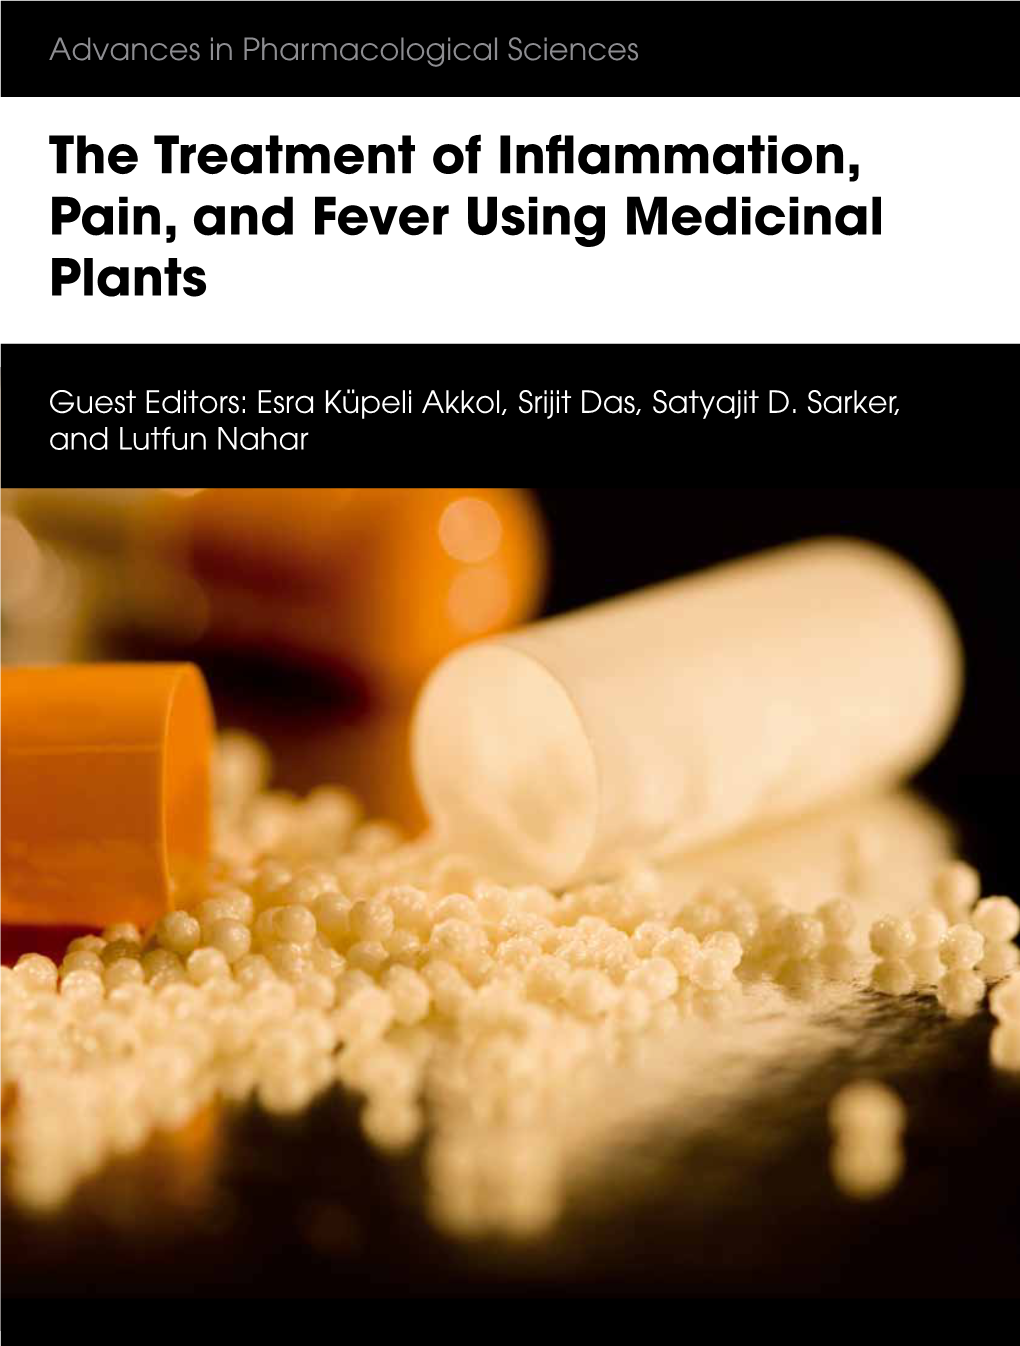 The Treatment of Inflammation, Pain, and Fever Using Medicinal Plants